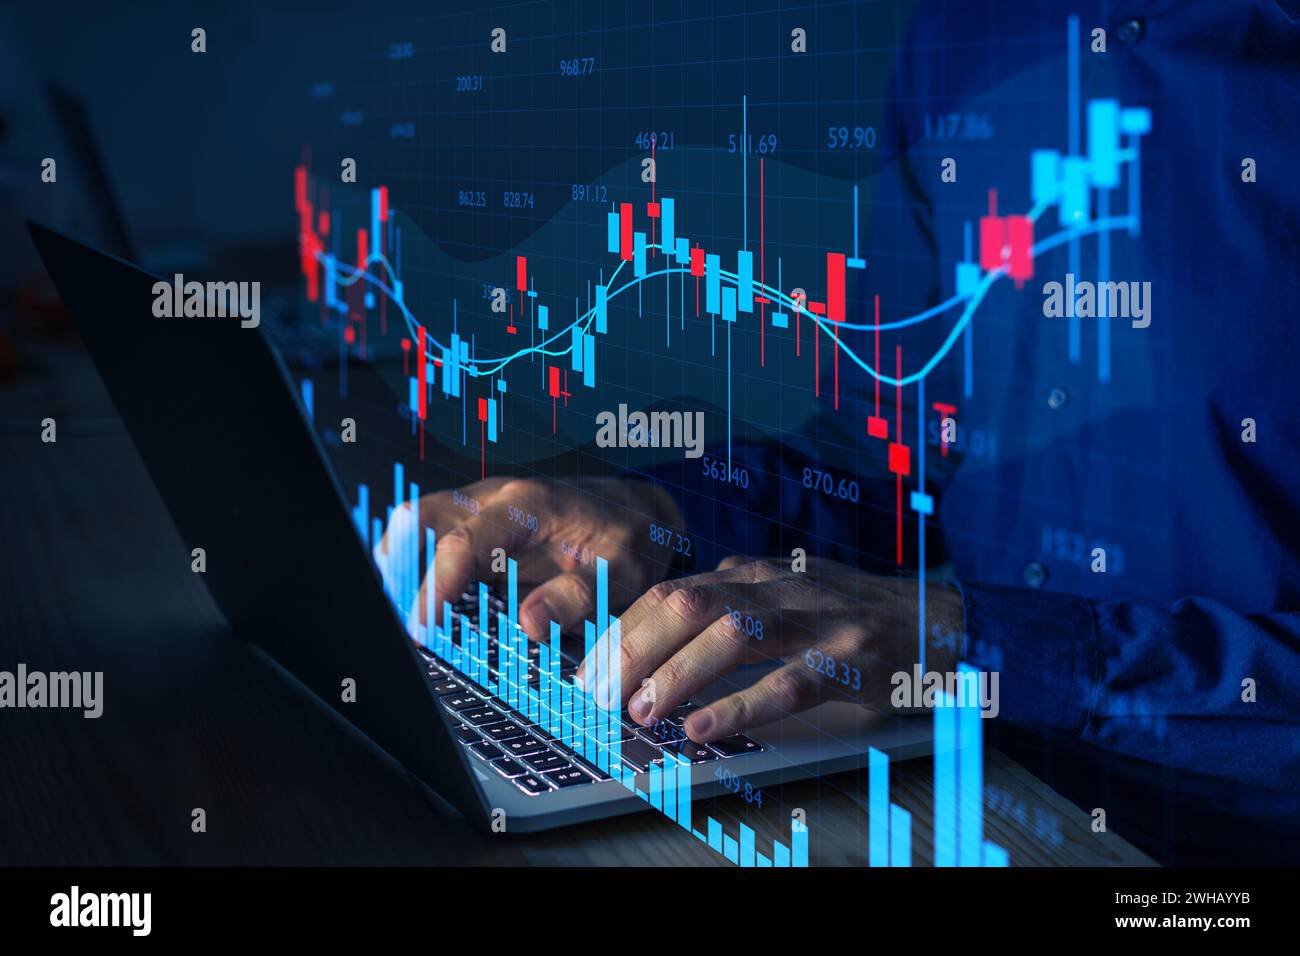 Stock market and trading data. Investor analyzing financial chart. Technical analysis, investment, banking. Stock Photo